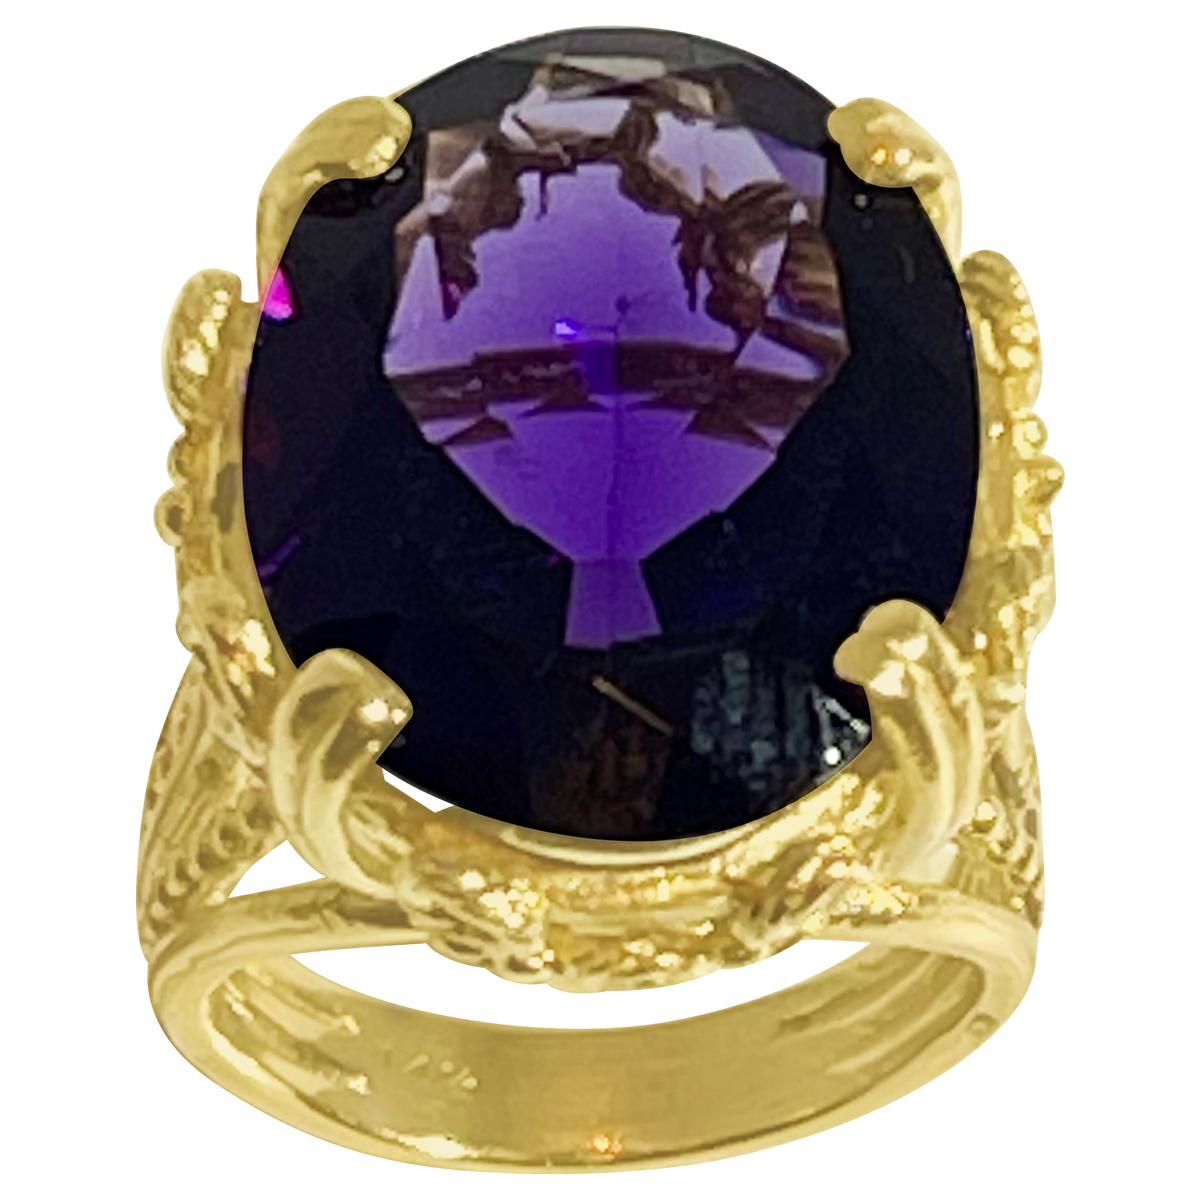 Approximately 13 Carat Beautiful  Amethyst Cocktail Ring in 14 Karat Yellow Gold Size 5.5
This is a Beautiful Cocktail ring ring which has a large approximately 13  carat of high quality Amethyst . Color and clarity is extremely nice. Large Oval cut